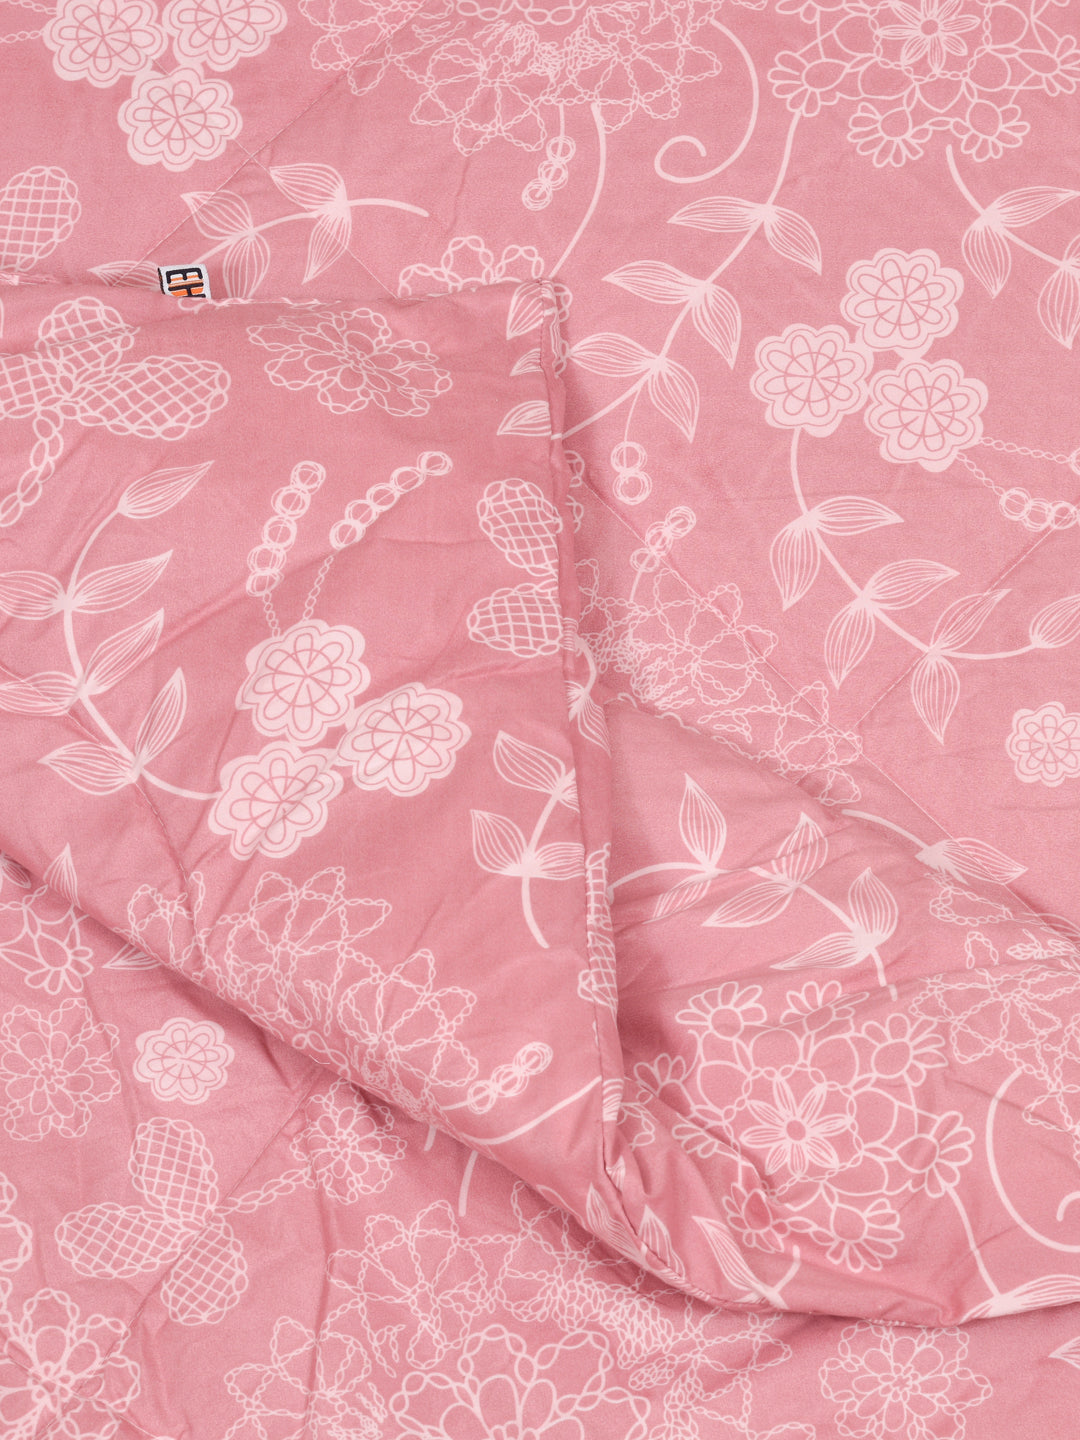 Pink Floral Print Double bed AC Comforter